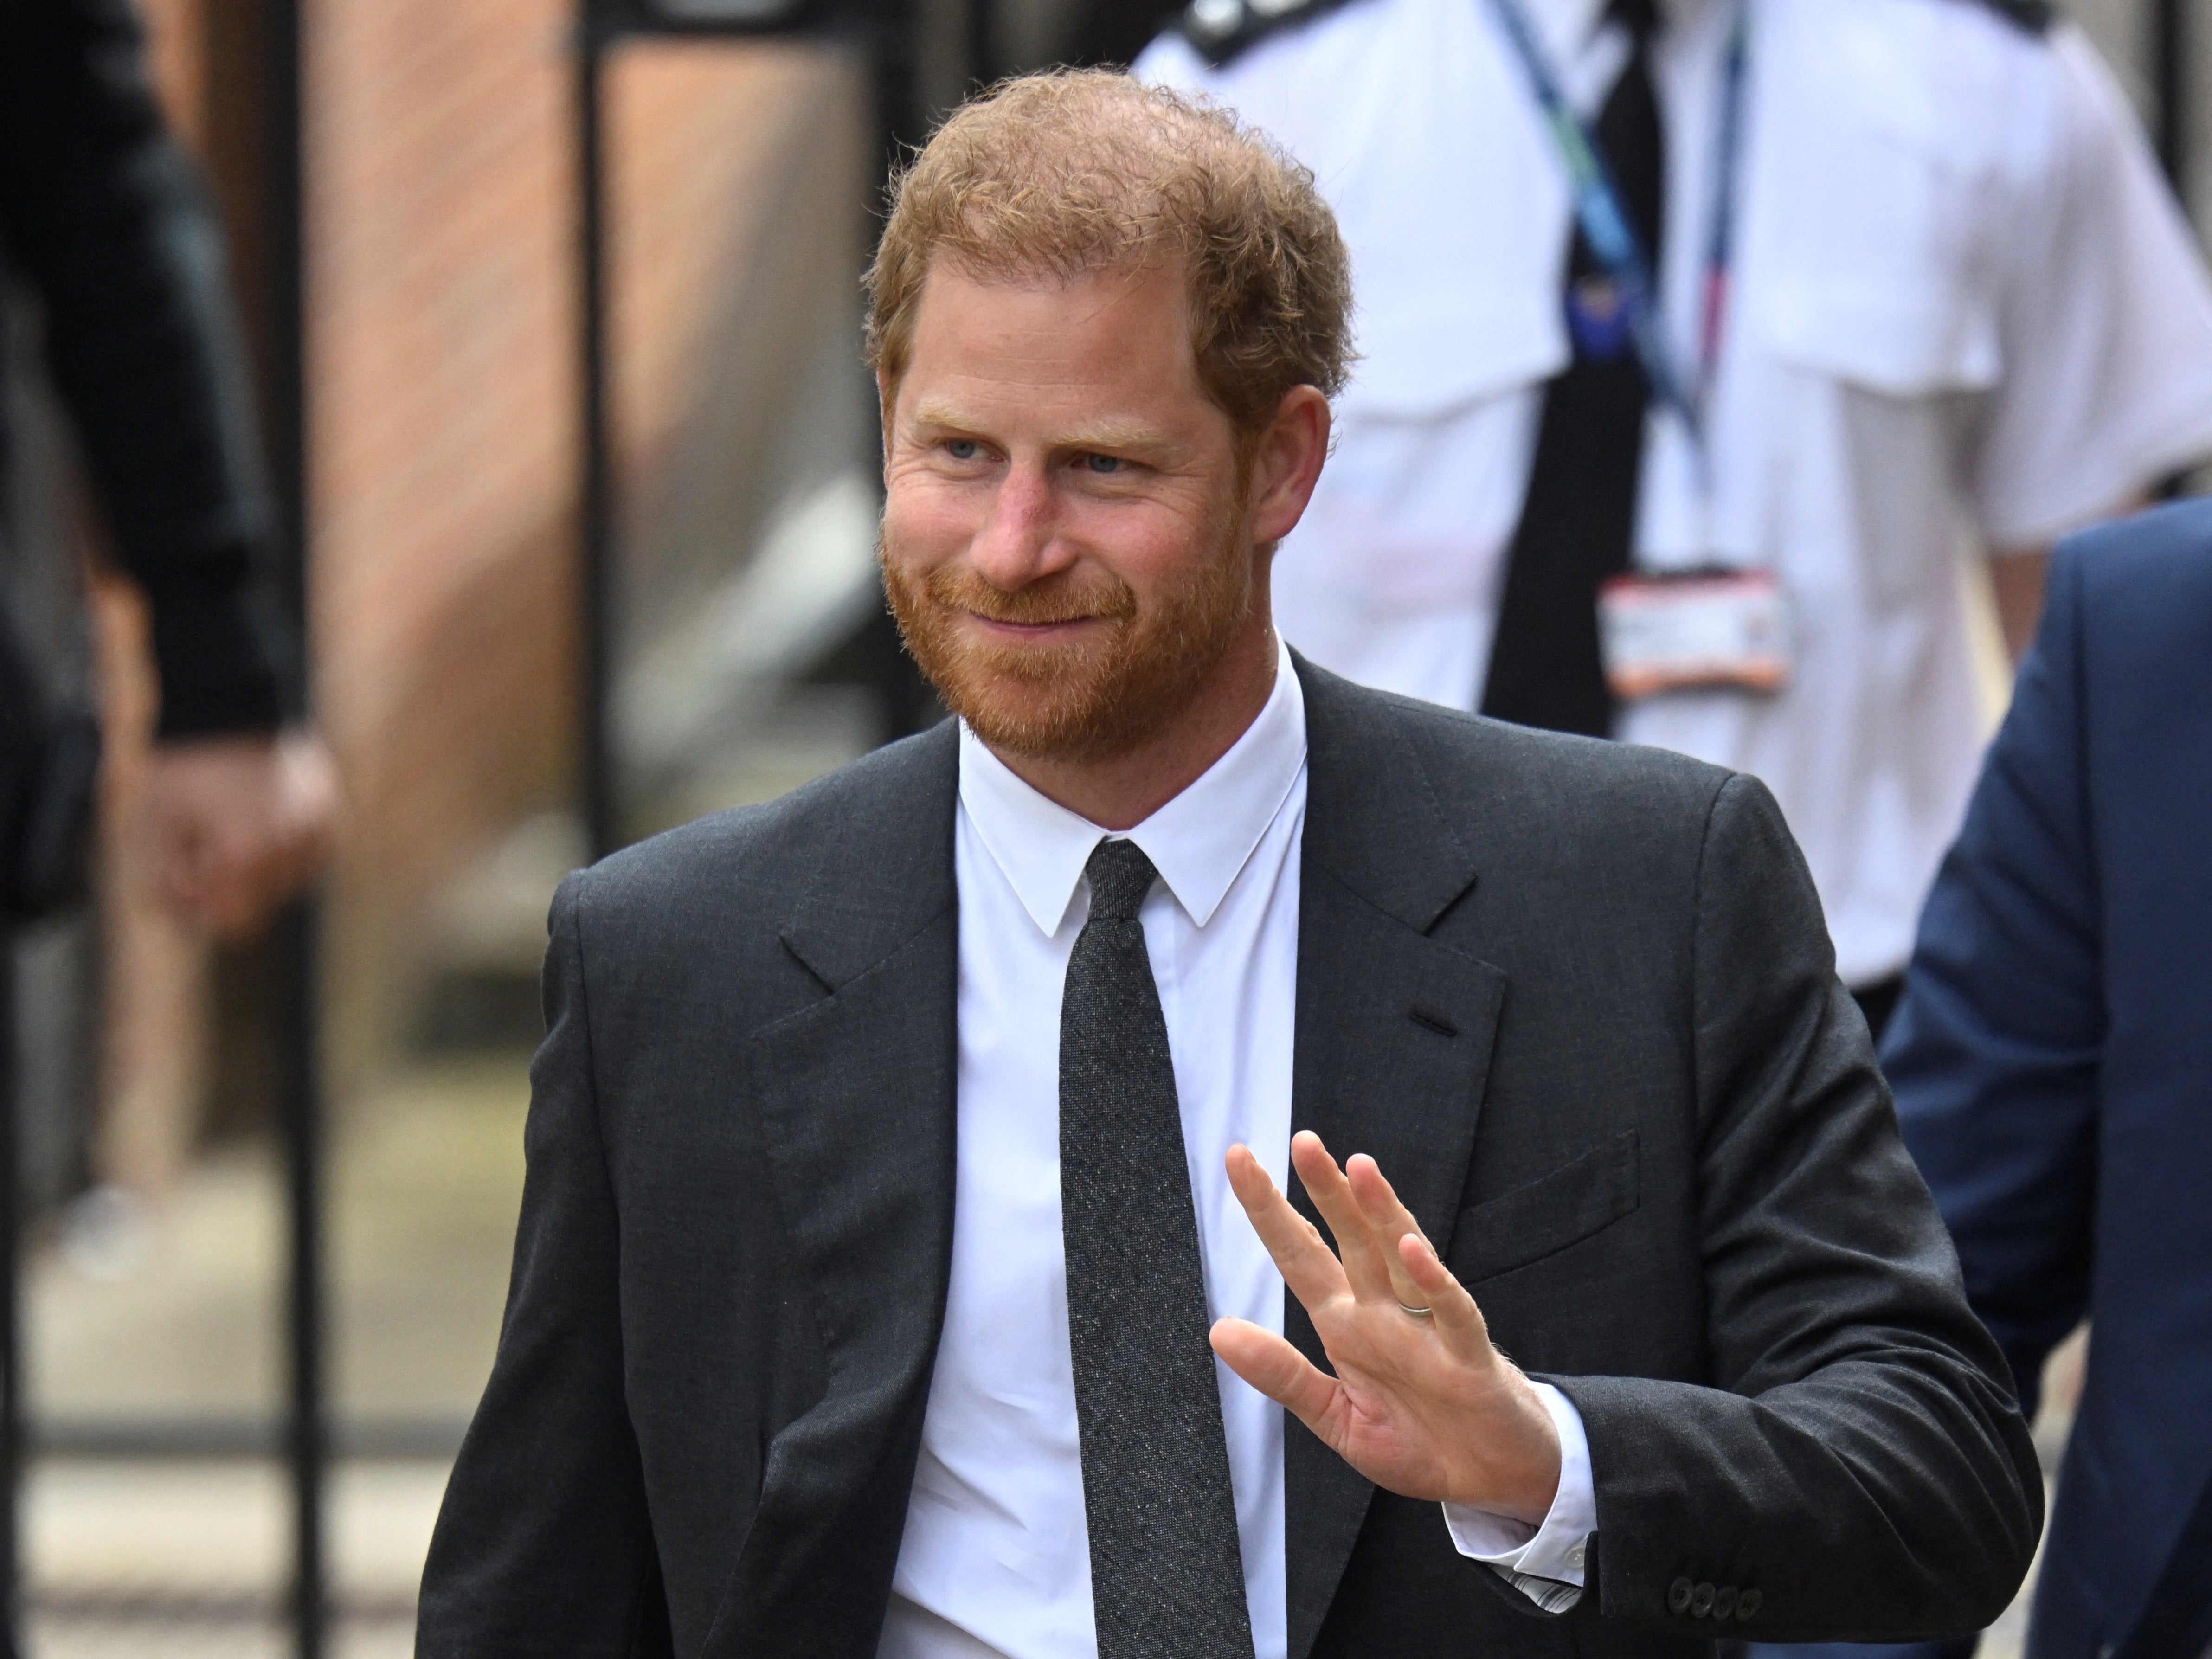 Prince Harry attended court hearings in March in a legal battle with the Daily Mail’s publisher